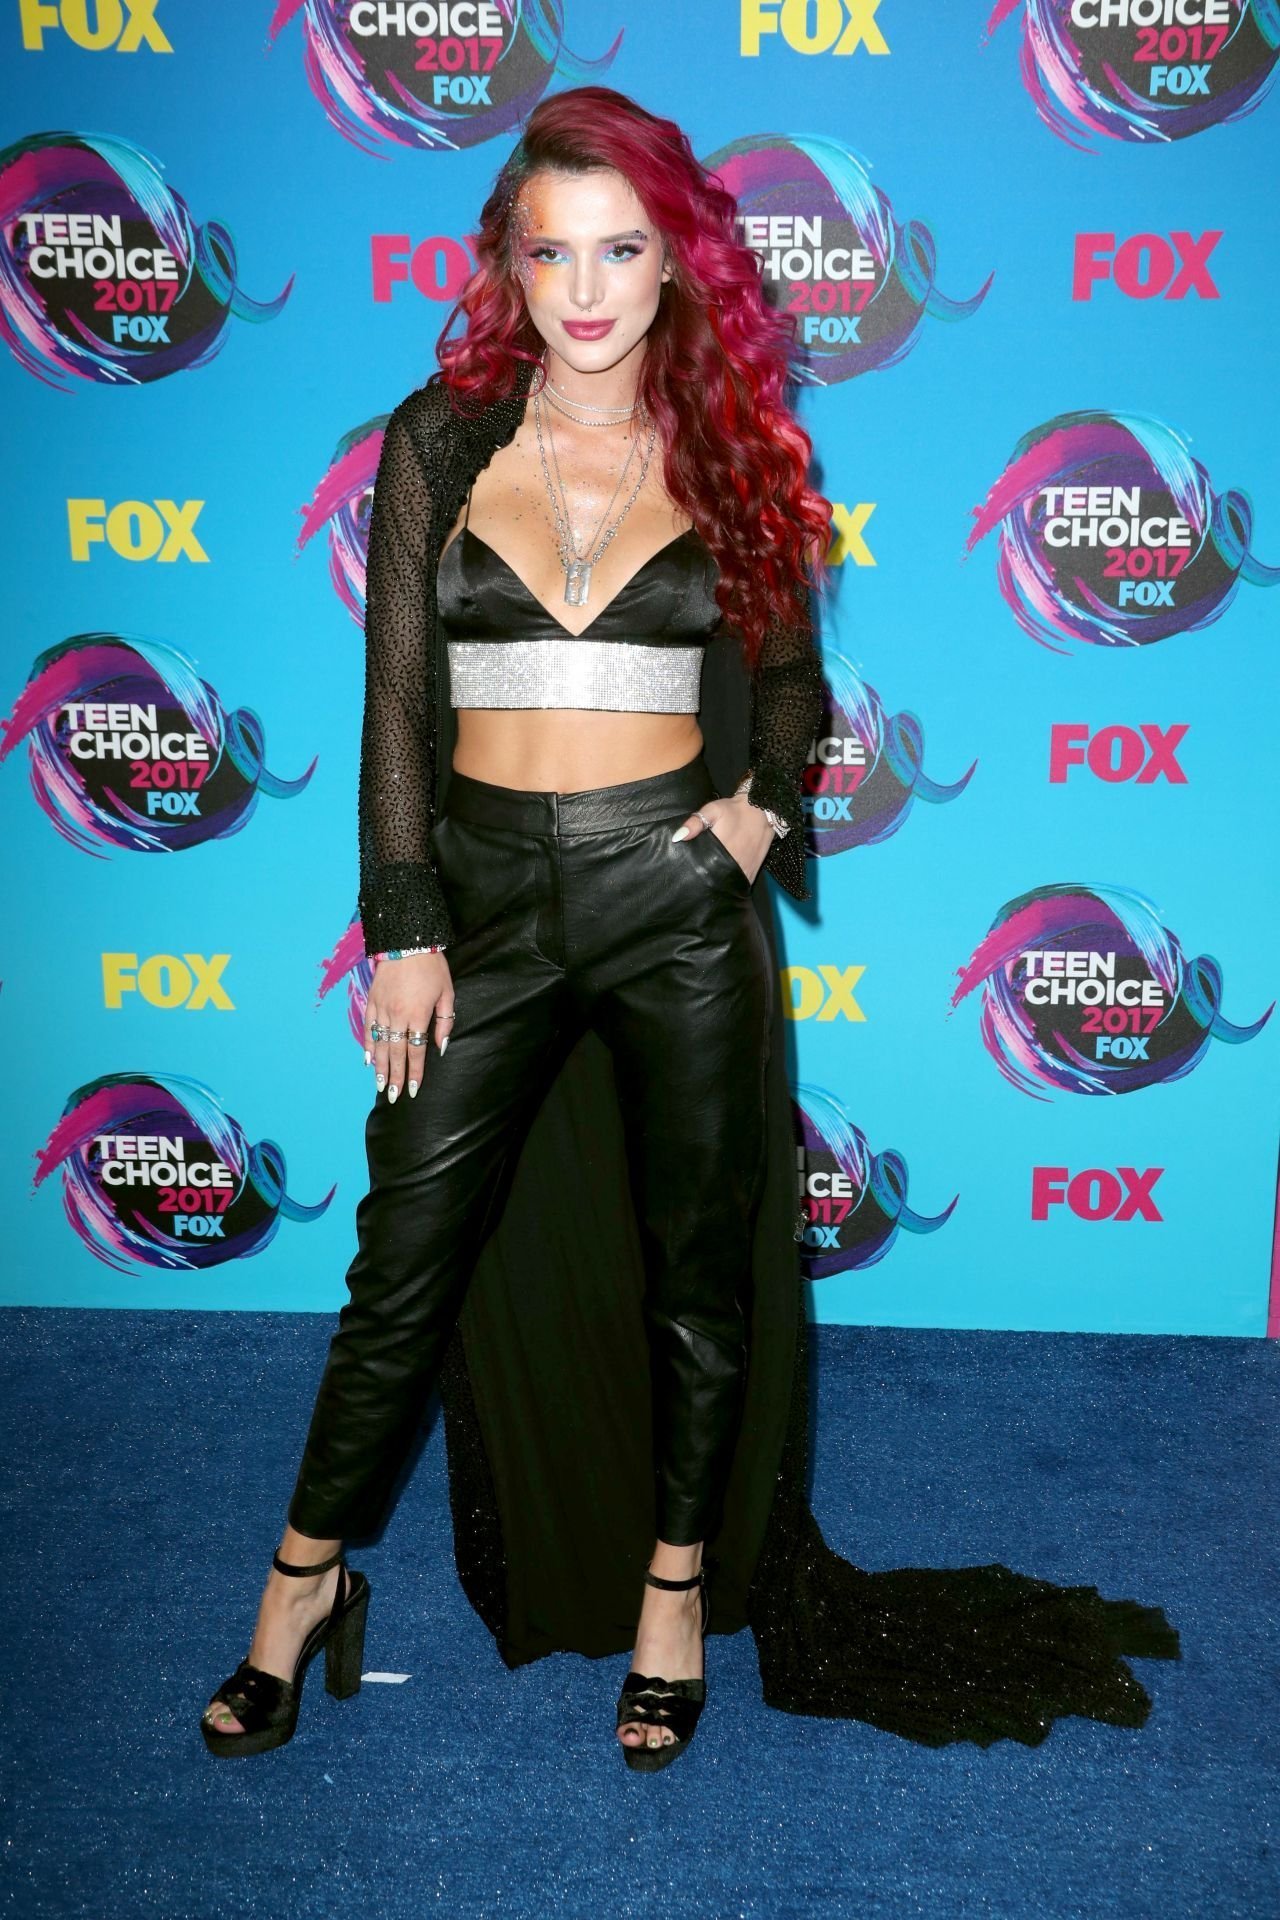 Bella Thorne - Teen Choice 2017 Awards in Los Angeles | Picture 1522968